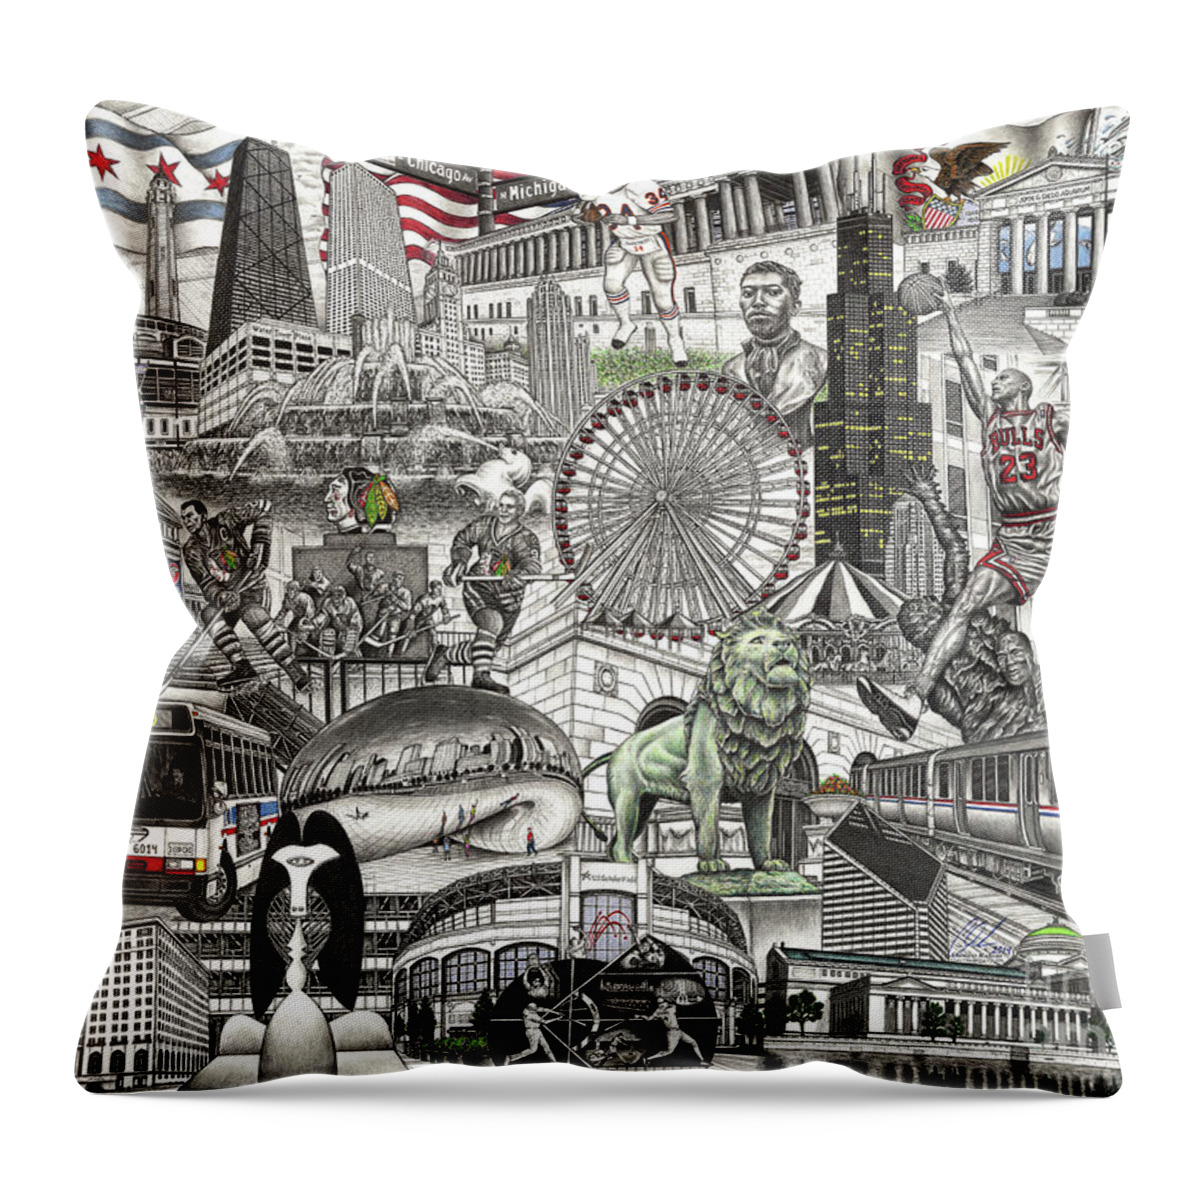 Chicagoblackhawks Throw Pillow featuring the drawing I Love Chicago volume 2 by Omoro Rahim